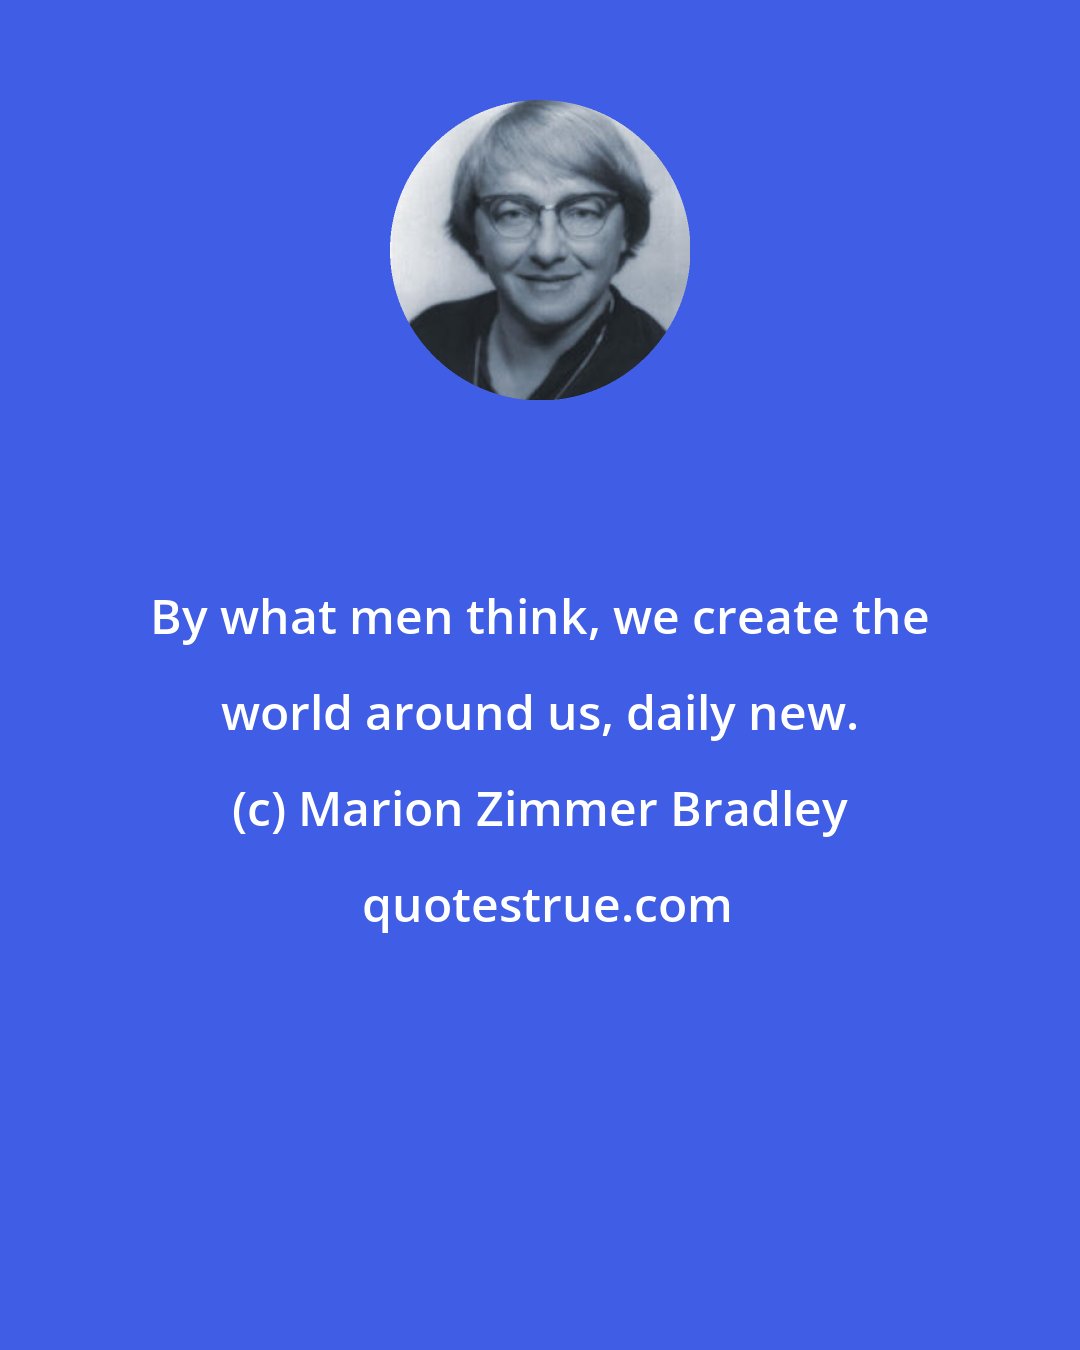 Marion Zimmer Bradley: By what men think, we create the world around us, daily new.